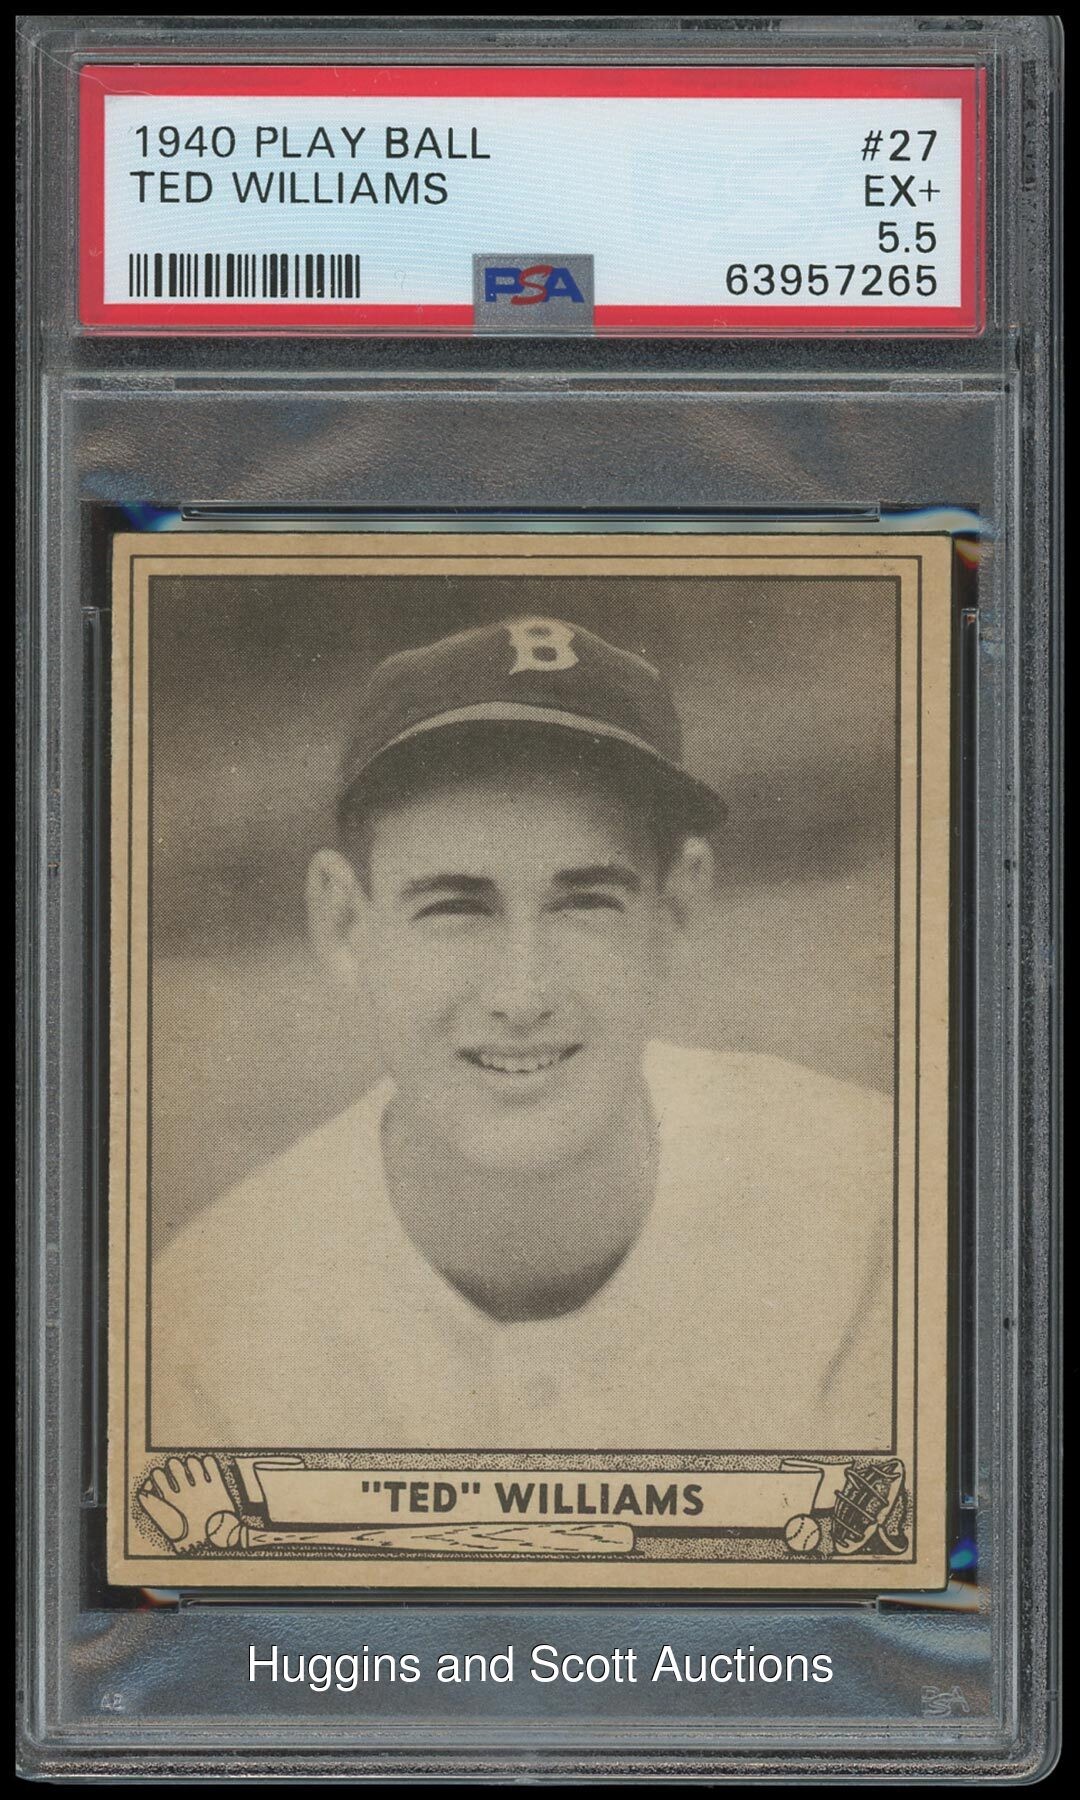 1940 Play Ball #27 Ted Williams - PSA EX+ 5.5